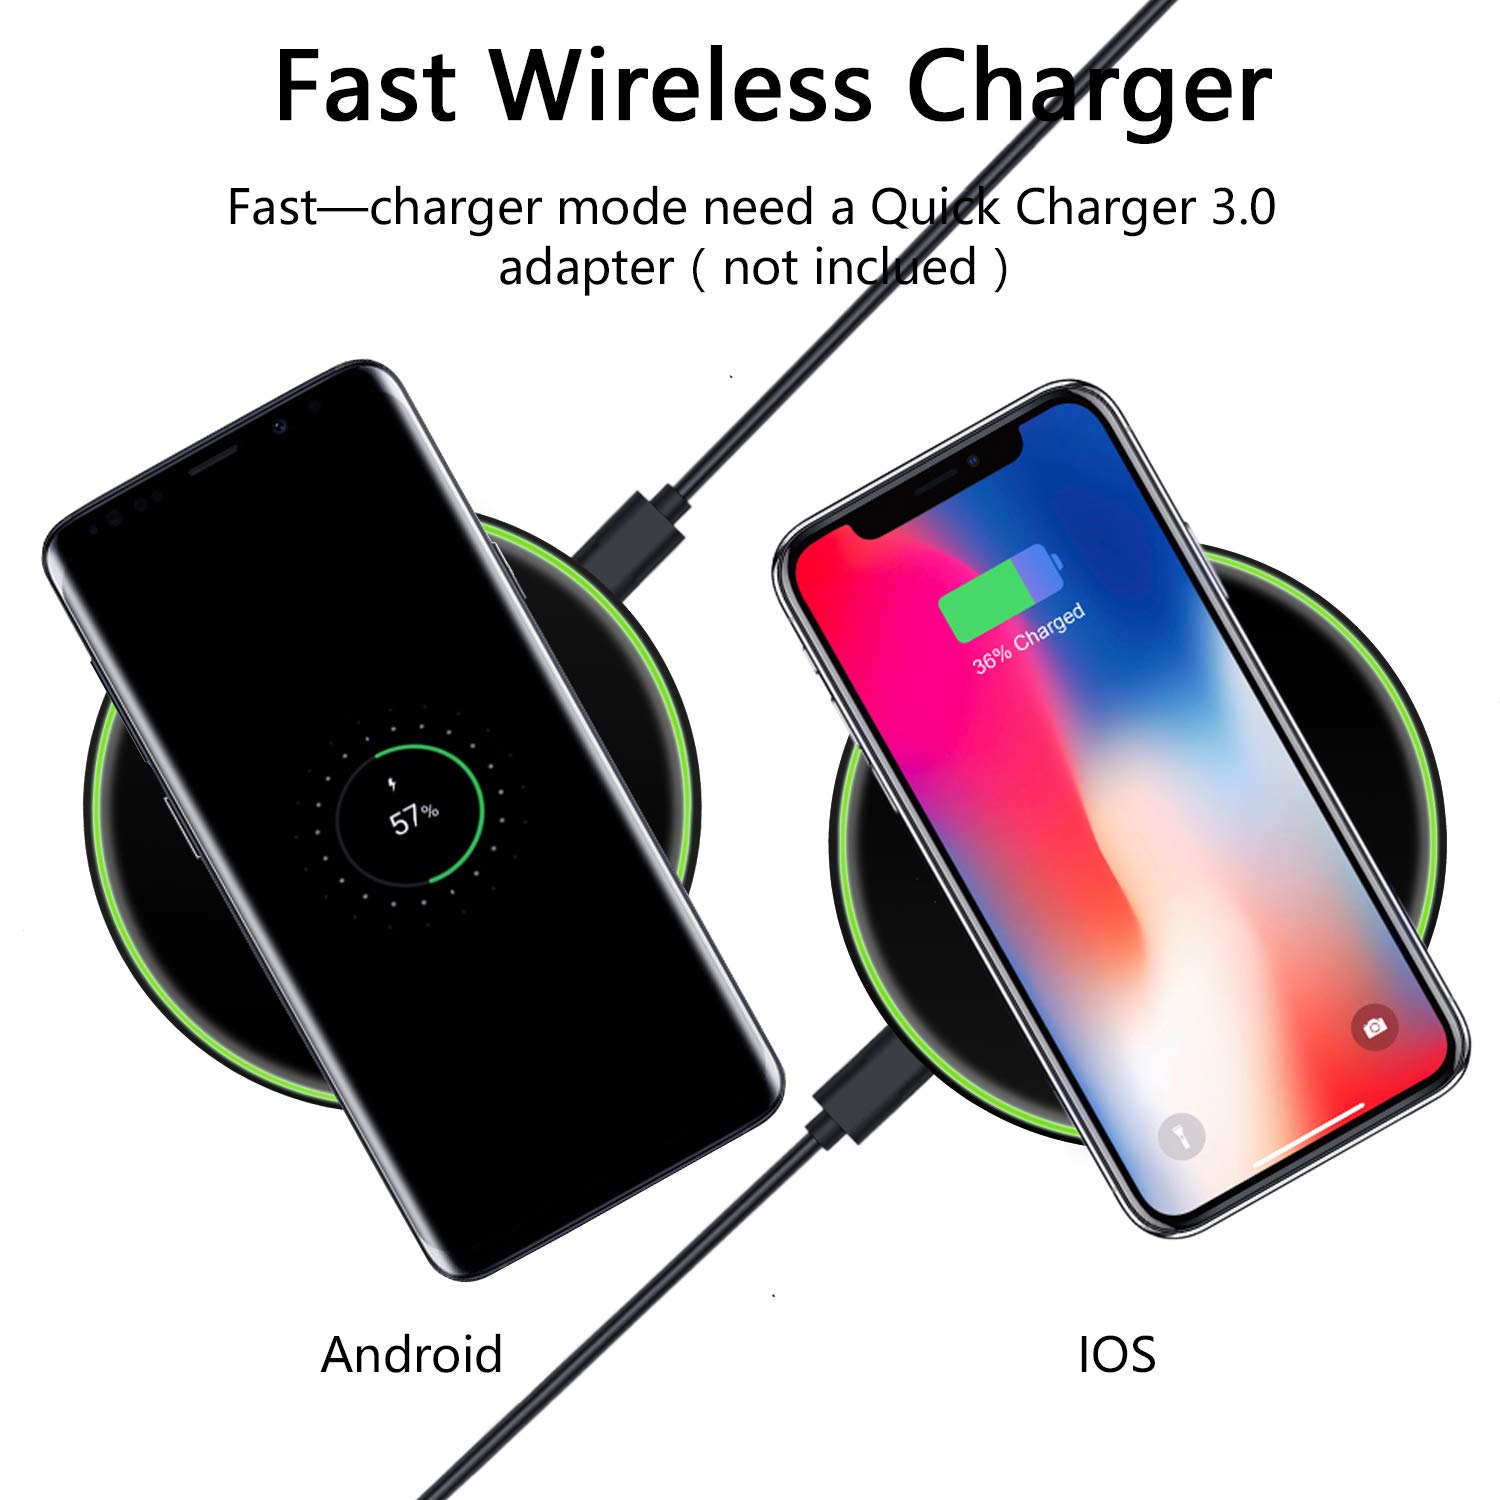 Contixo W2 Fast Wireless Charging Charger Pad | Ultra-Thin Slim Design for Qi  Compatible Smartphones iPhone 8/8 Plus/X/XS/XS Max/XR Samsung Galaxy S9/S9  Plus/S8/S8 Plus/S7/Note 8/9 - Walmart.com